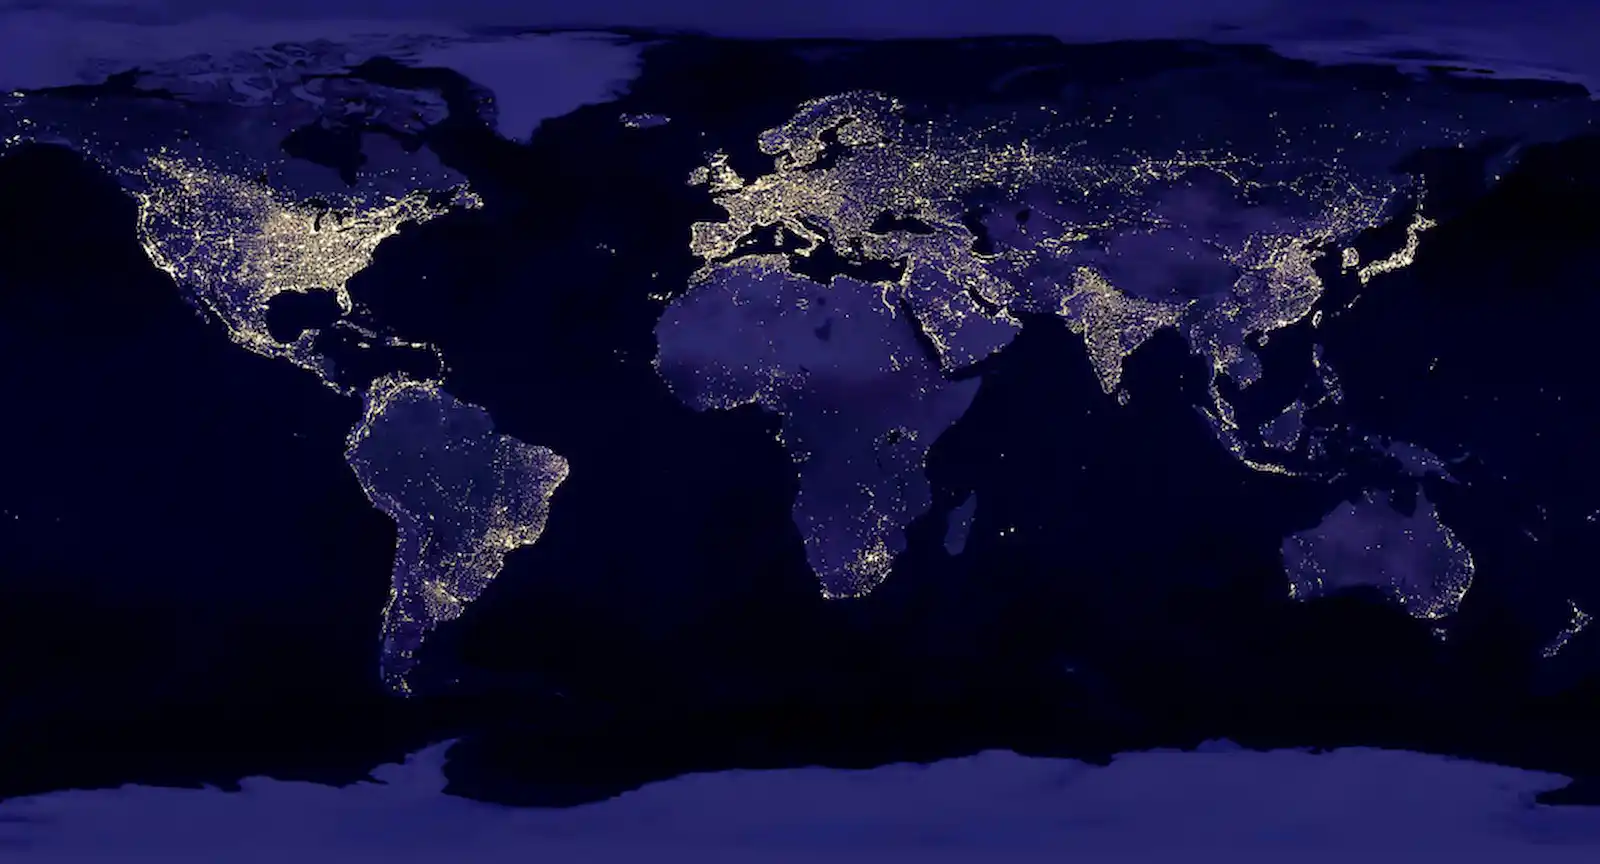 night time light levels accross the globe